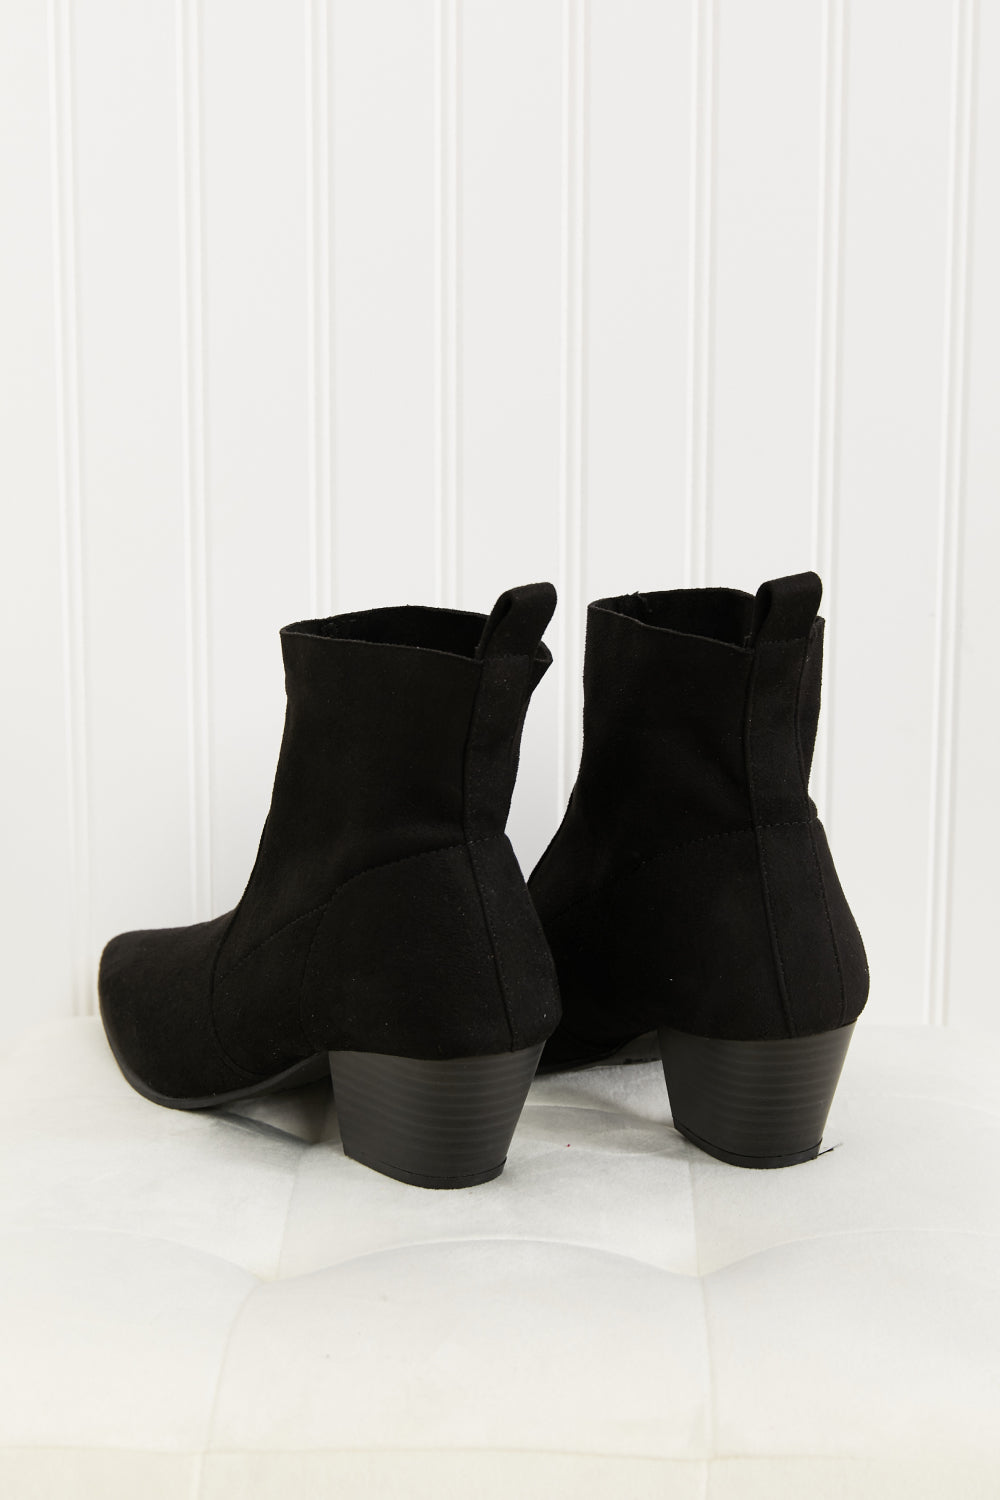 Qupid Leap of Faith Pointed Toe Sock Booties